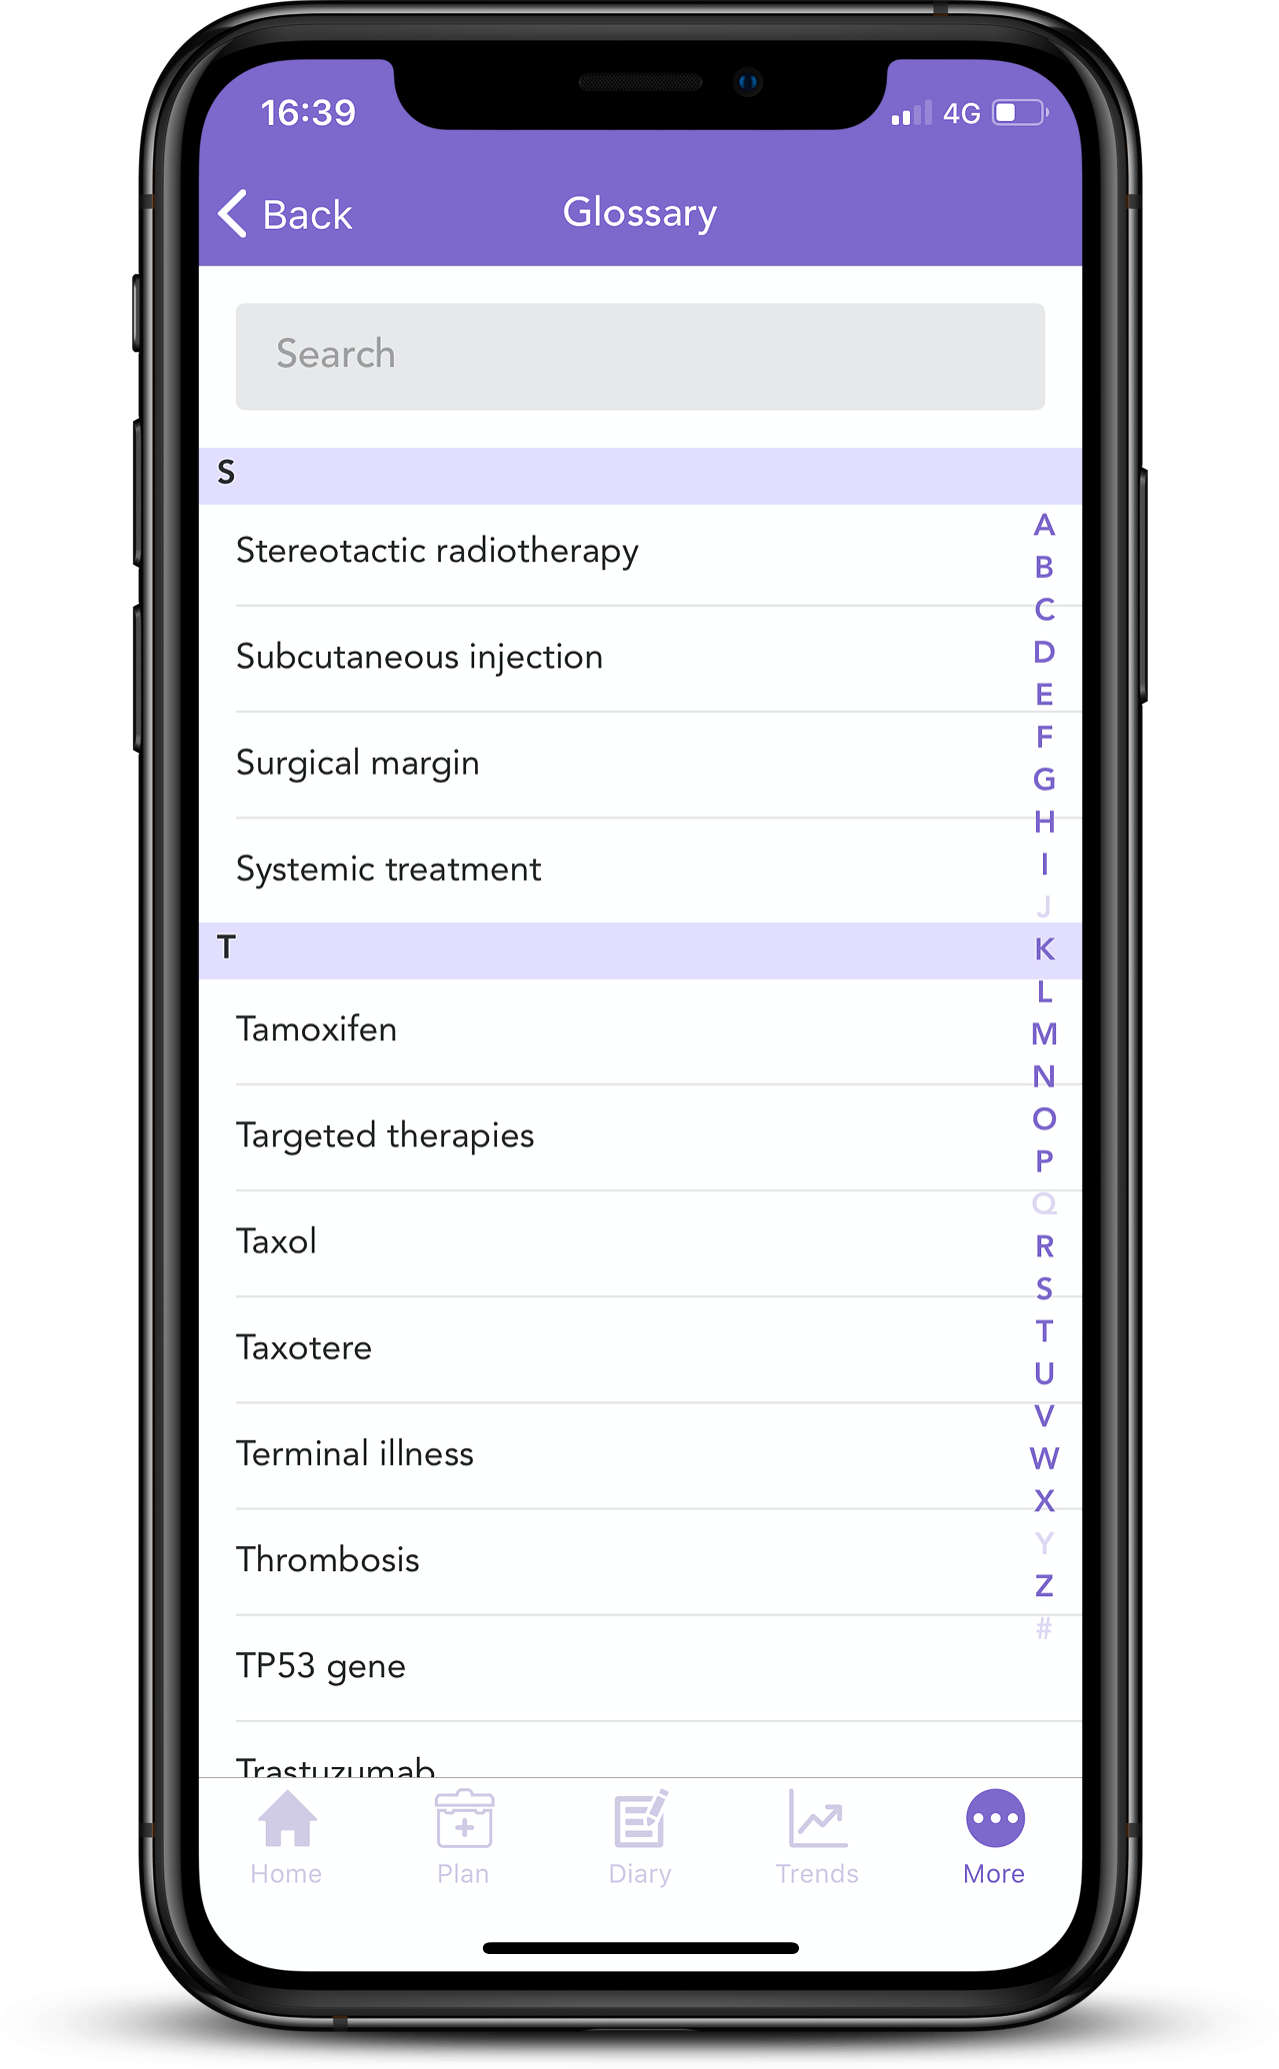 Use the glossary app to search monoclonal antibodies